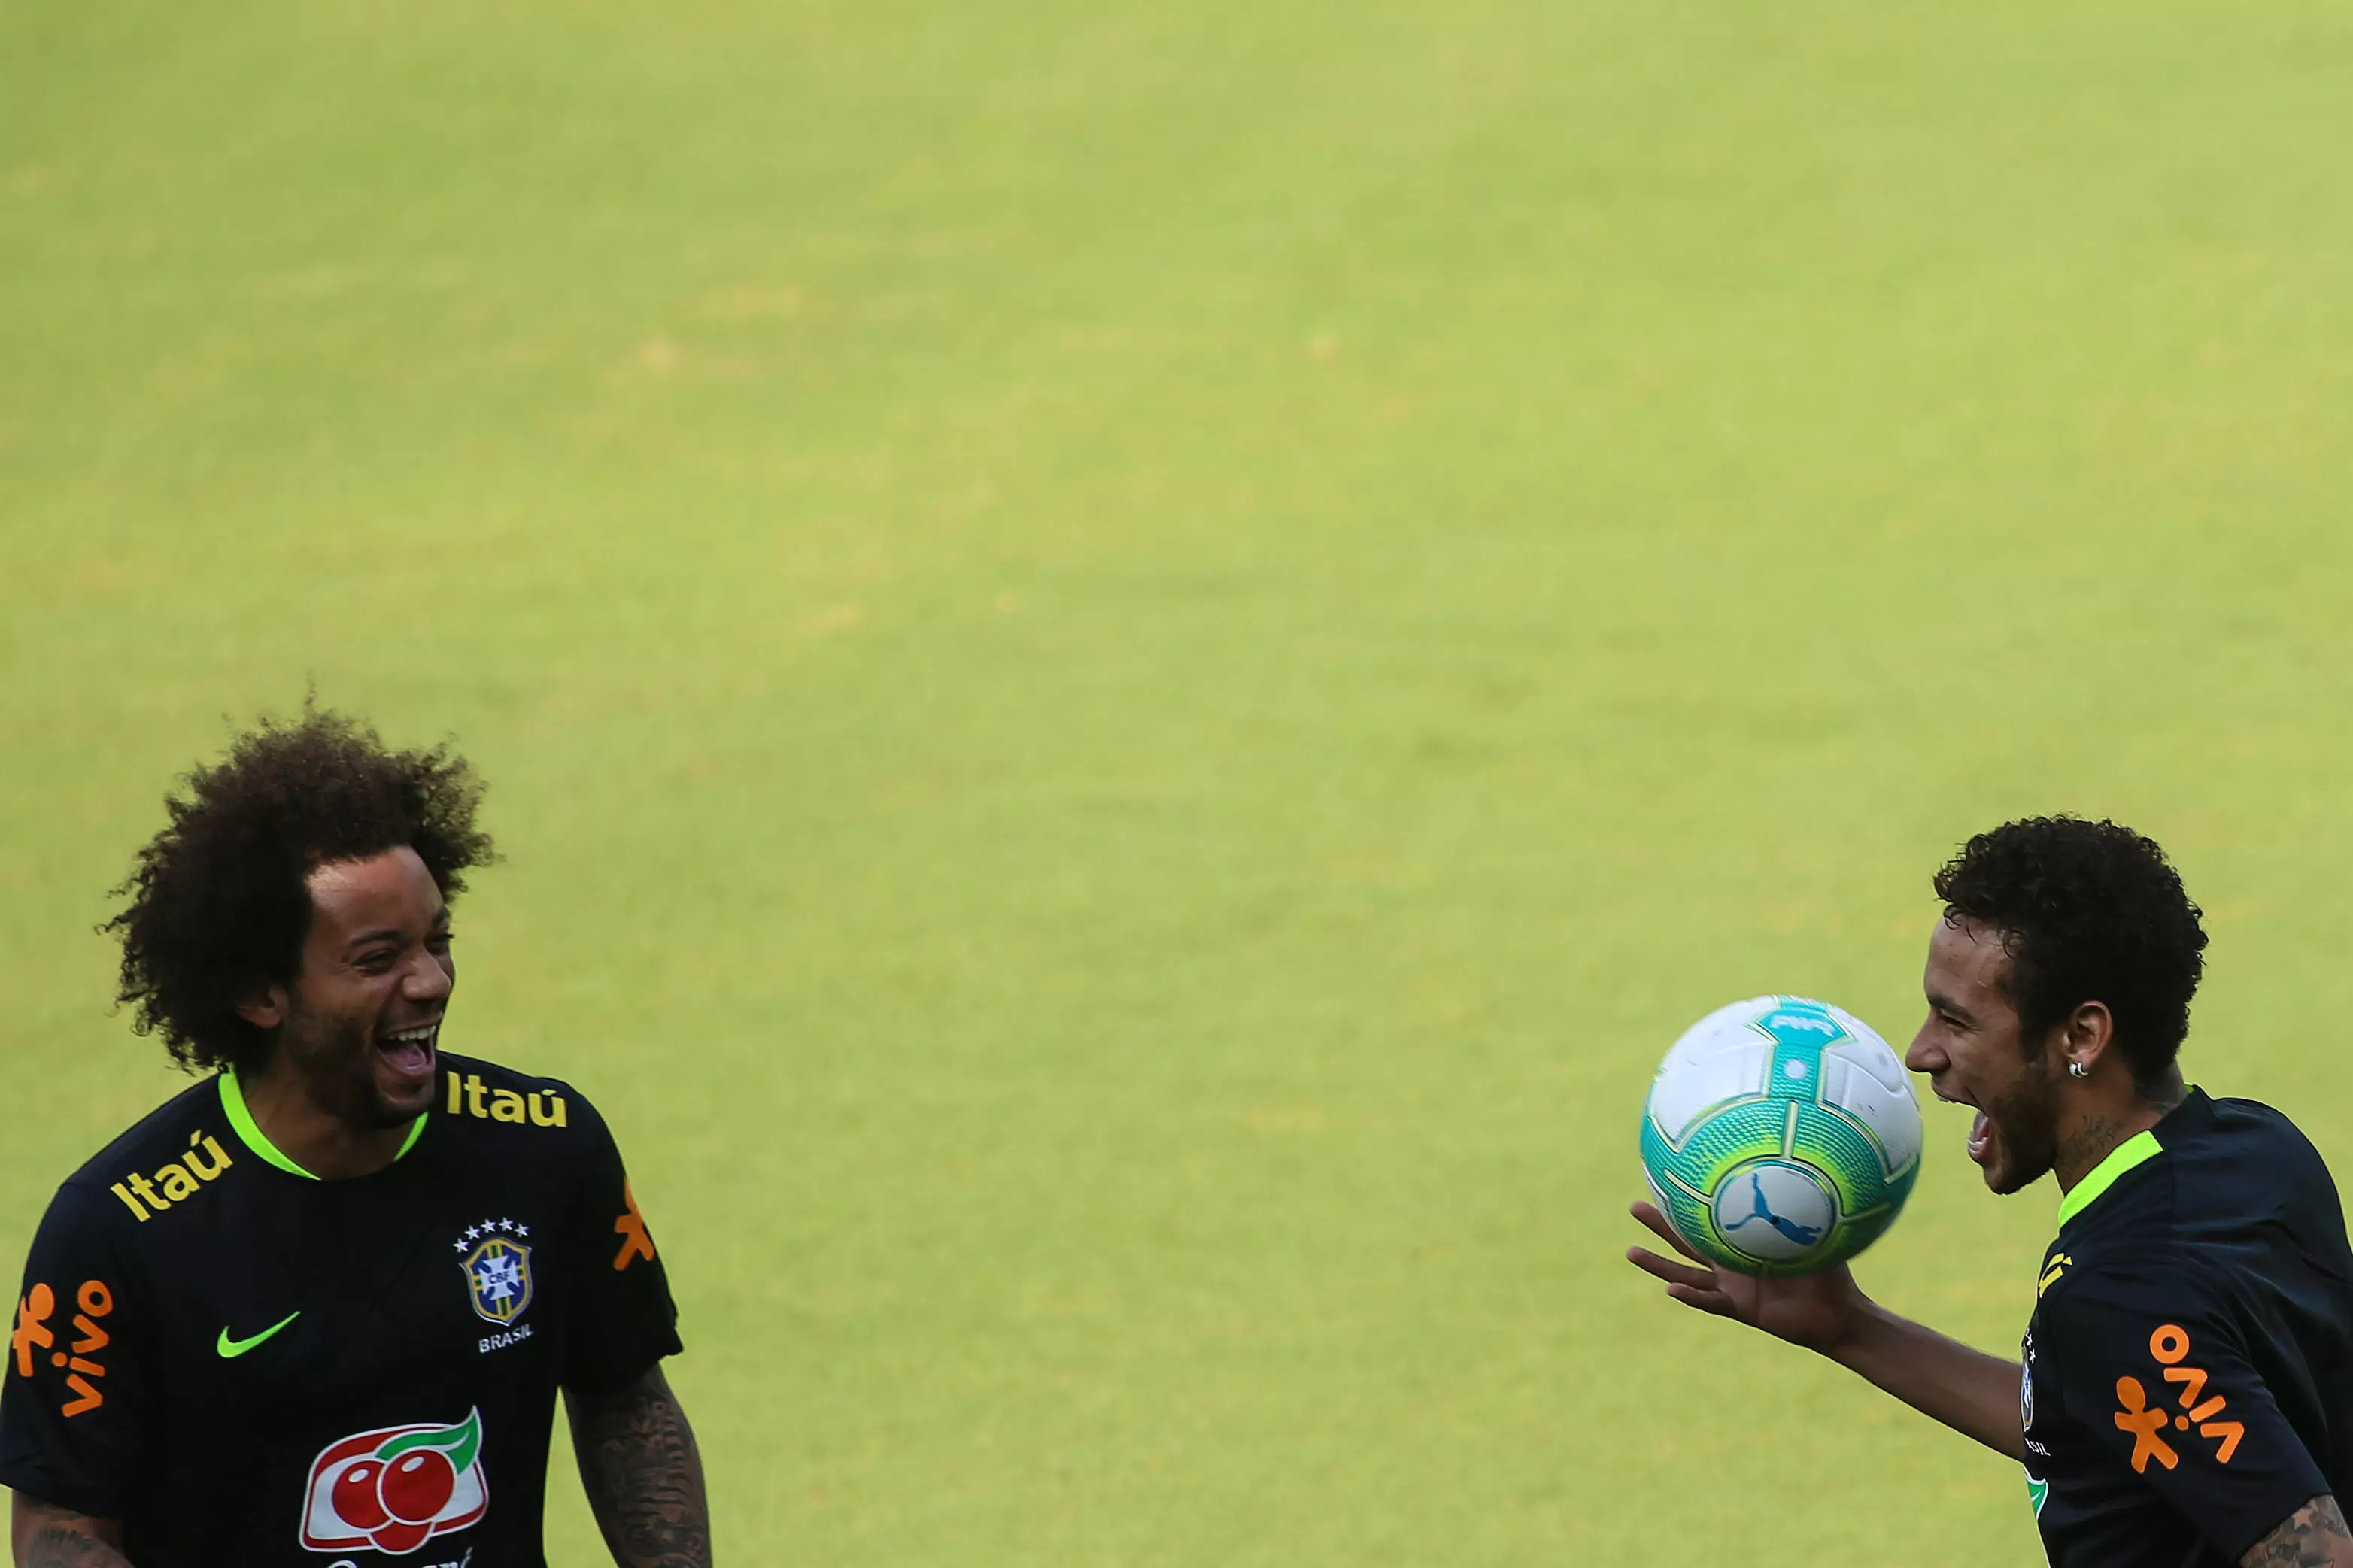 Could Marcelo and Neymar unite in Spain at some point? Image: PA Images